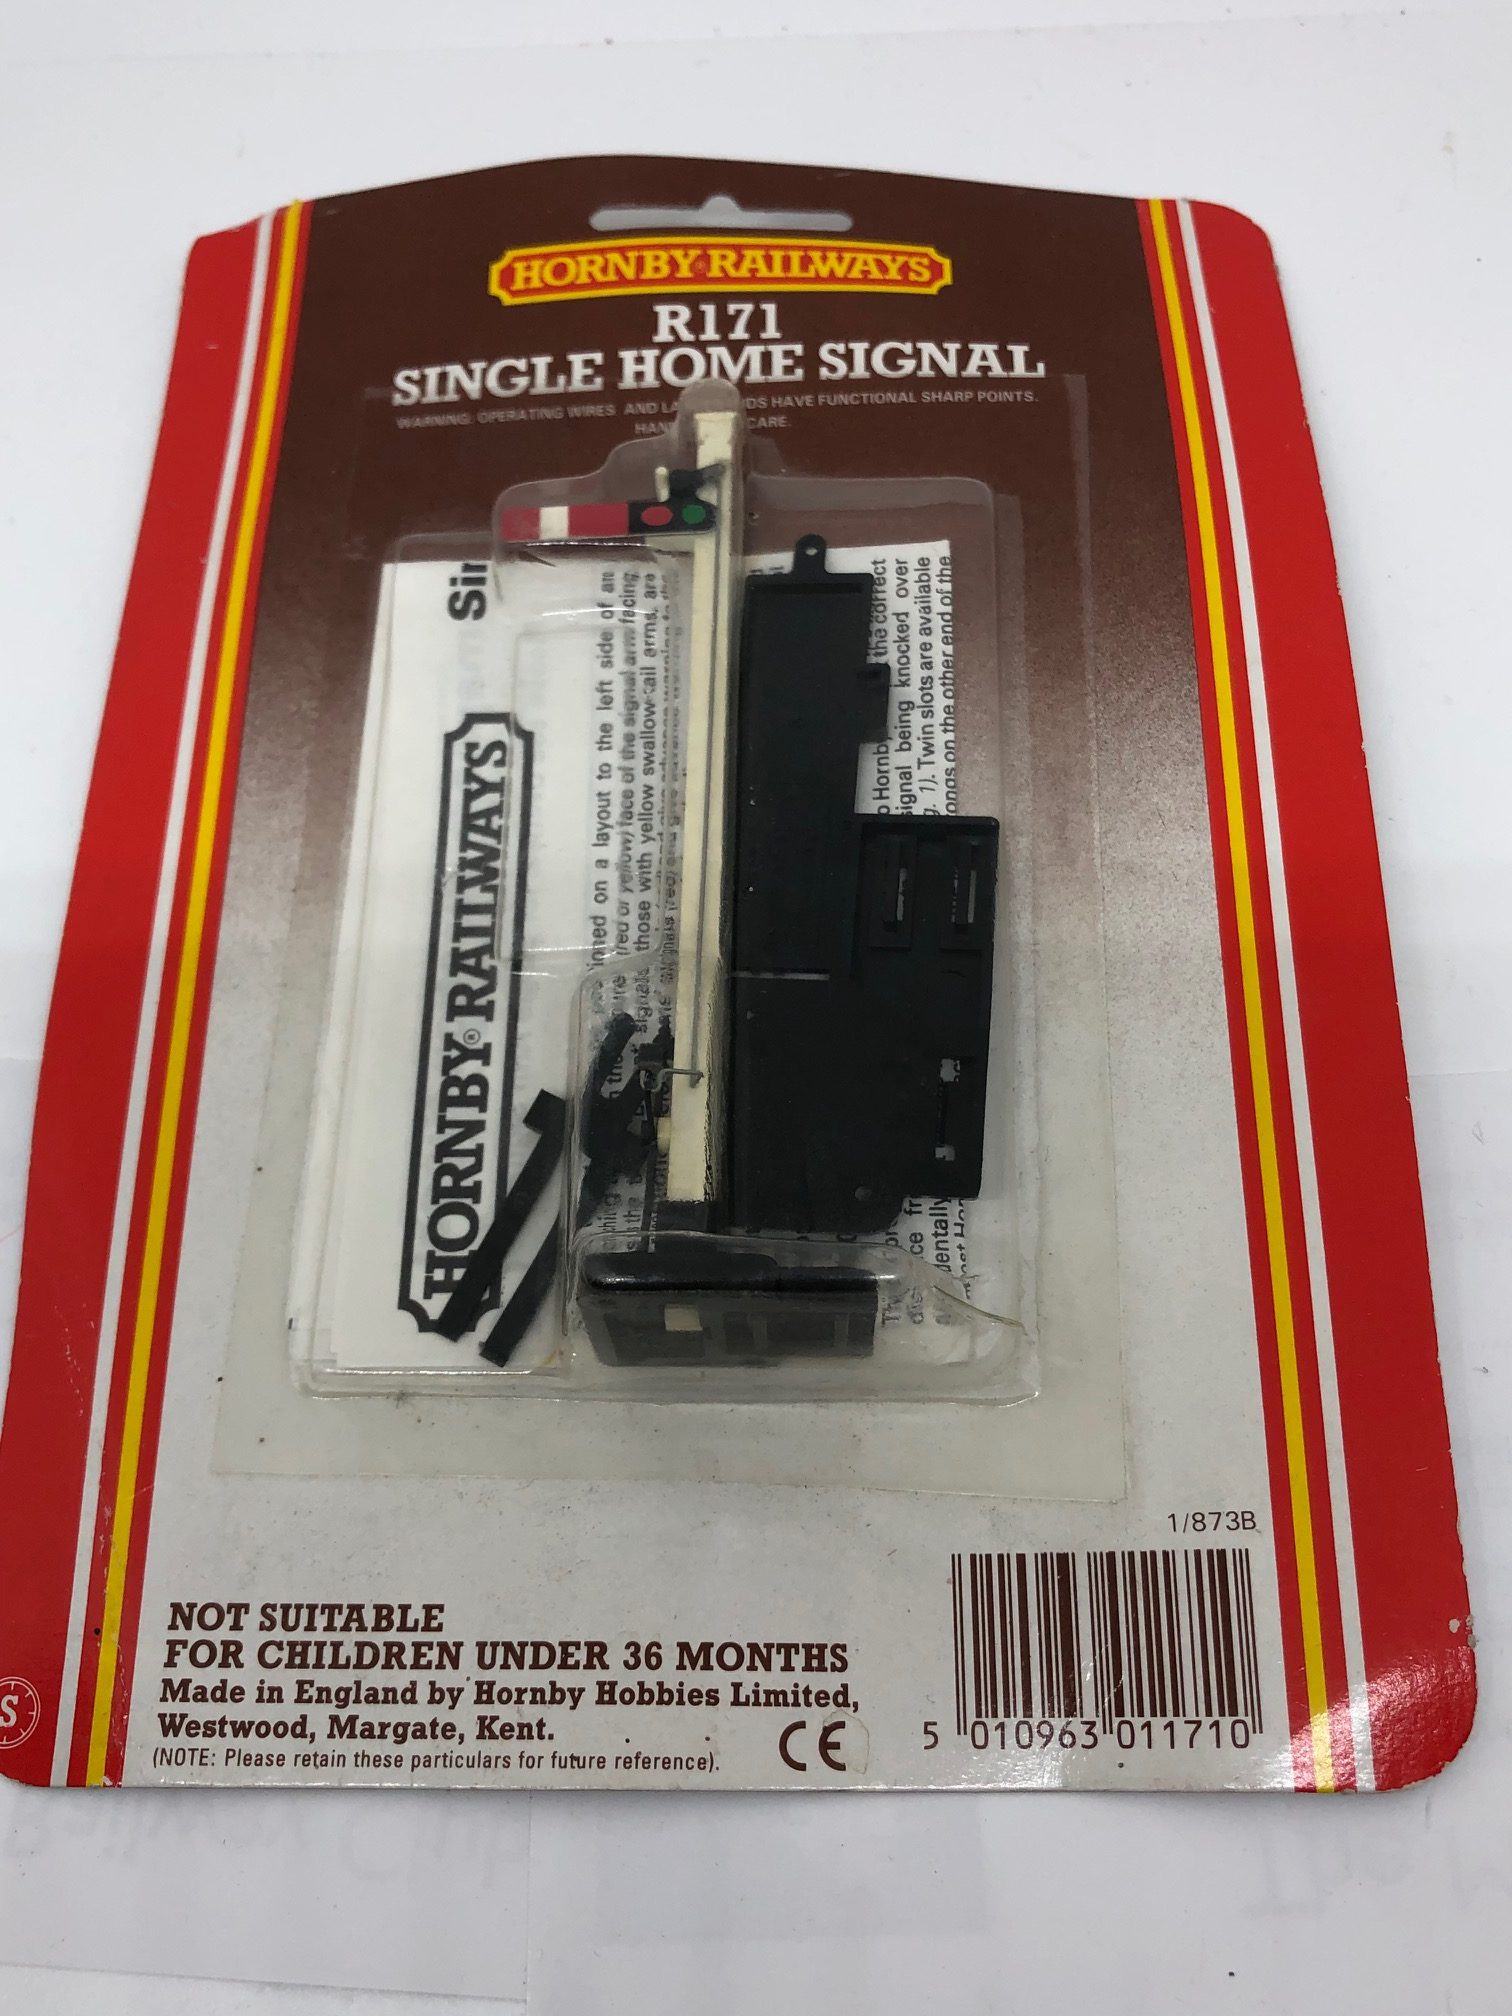 HORNBY R171 HOME SIGNAL NEW SEALED 